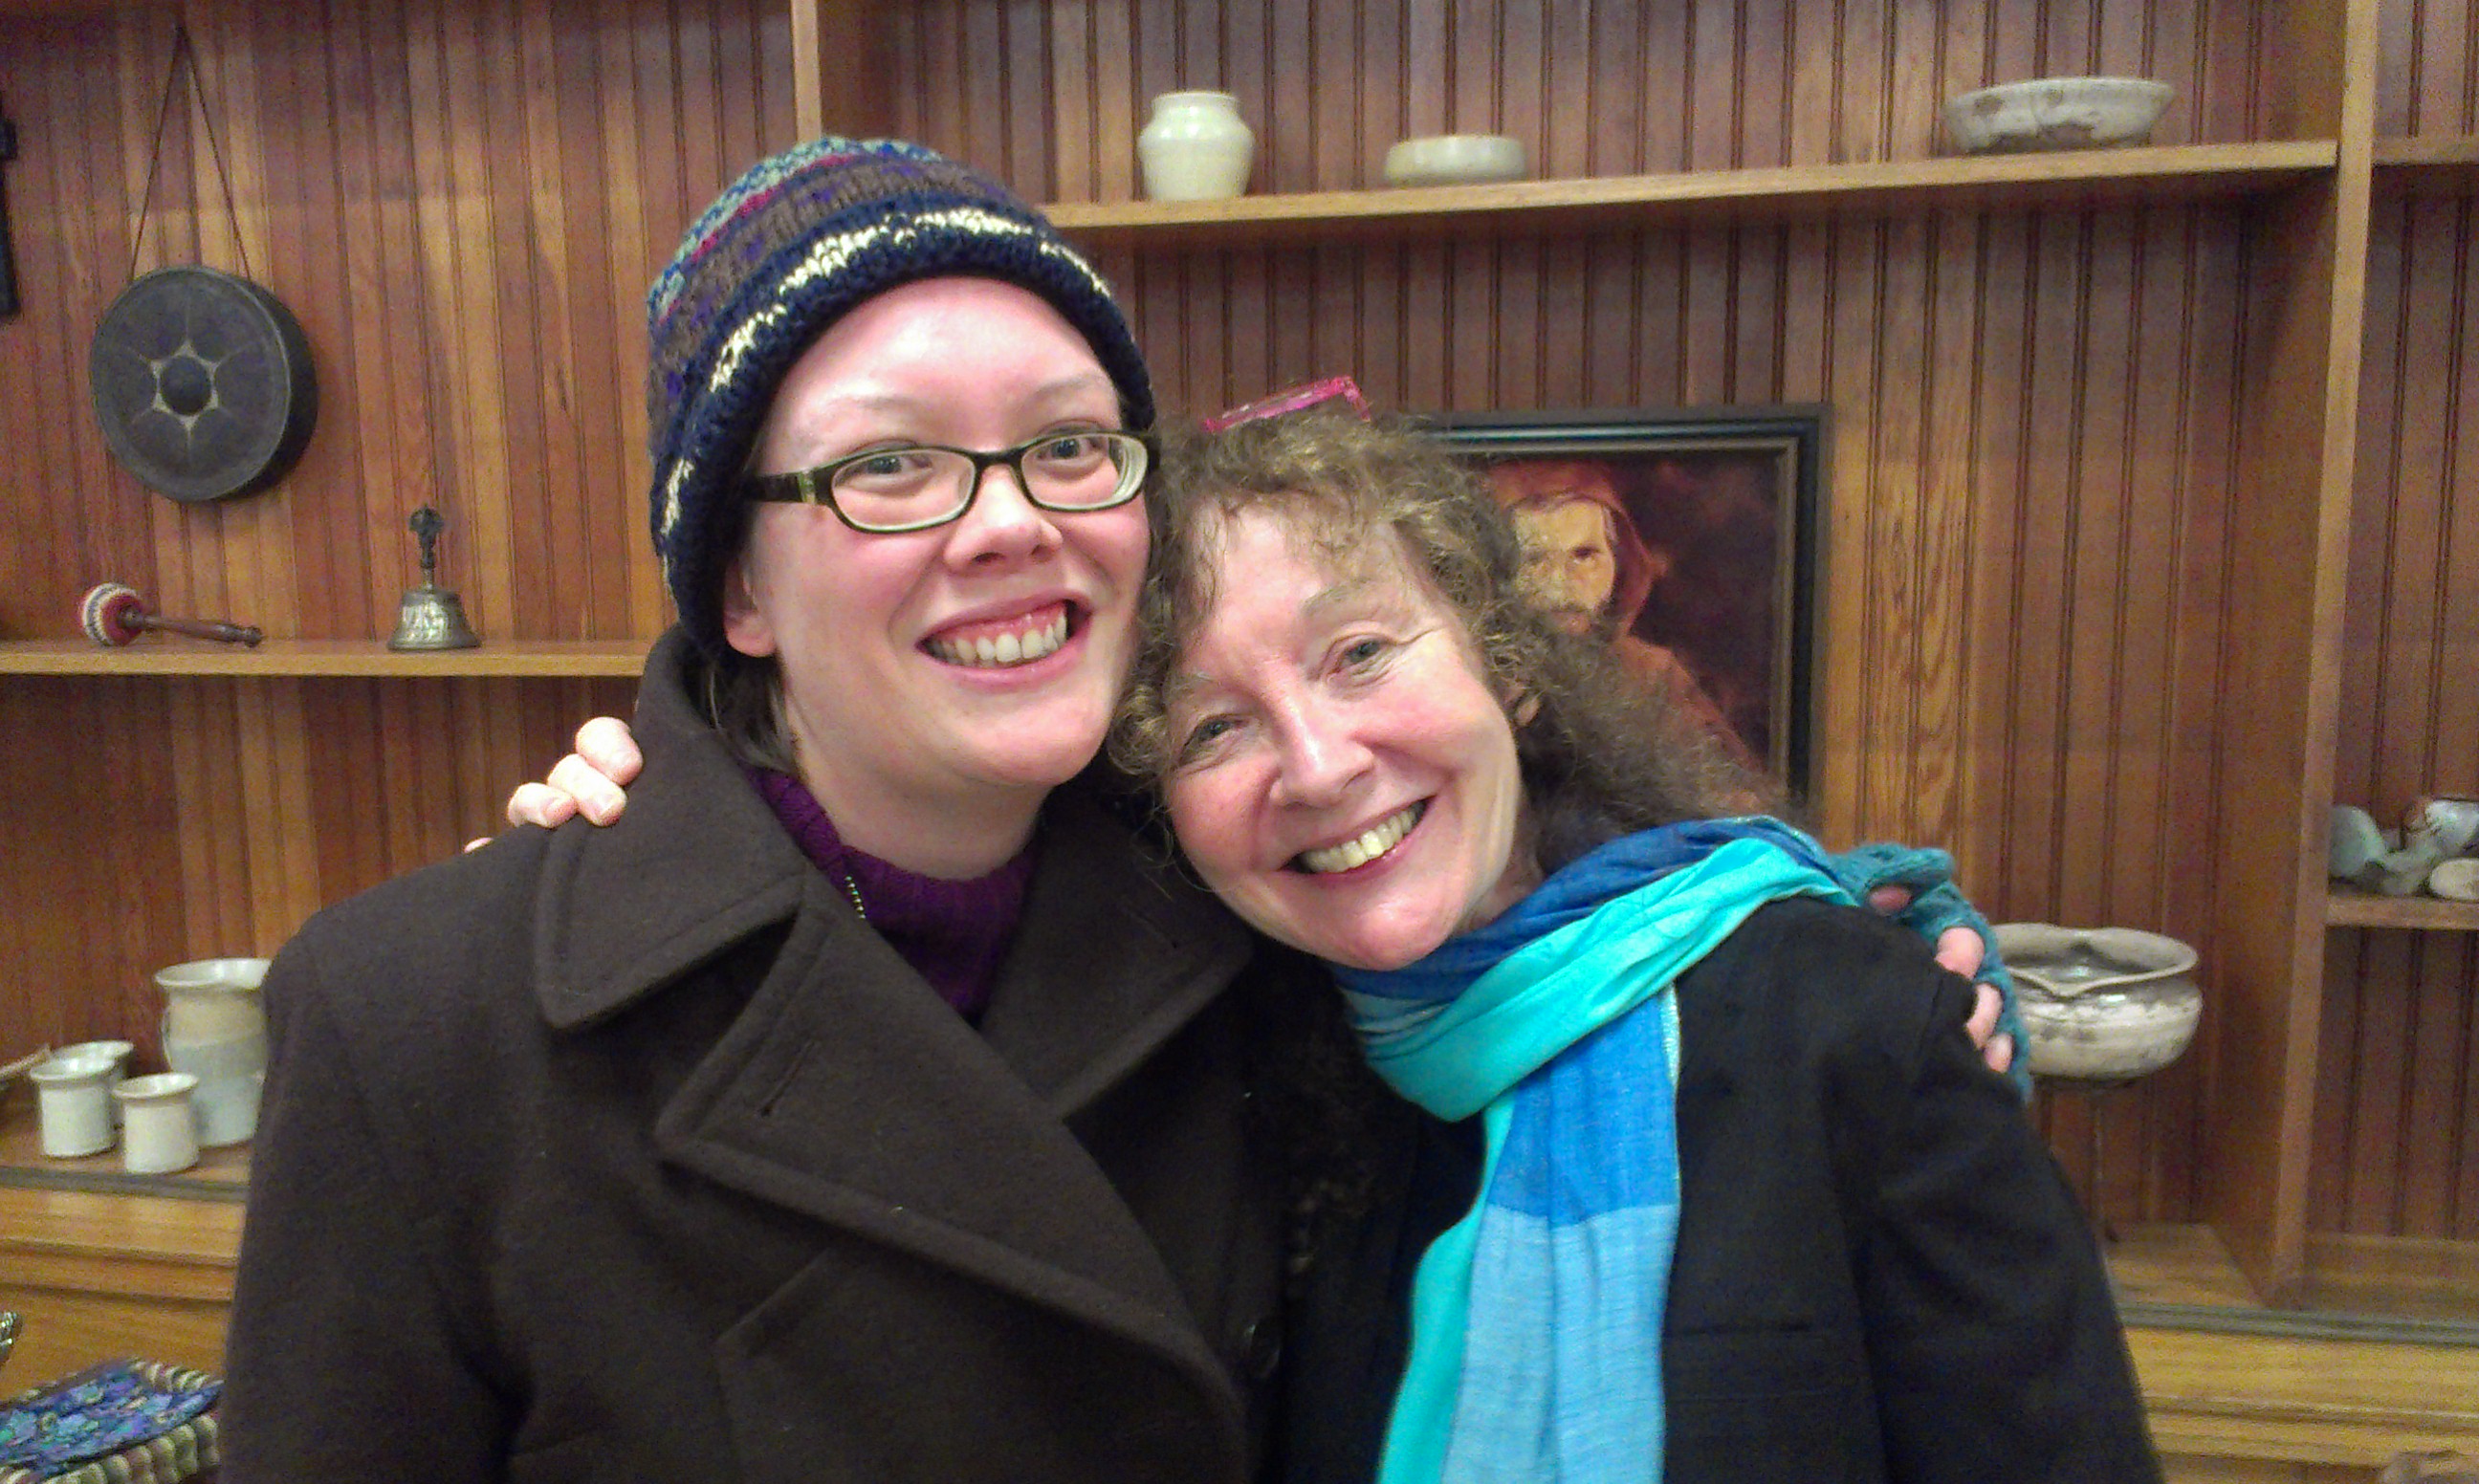 Kathy Kelly (R) and me at an event in La Crosse, WI; Novemeber, 2013.